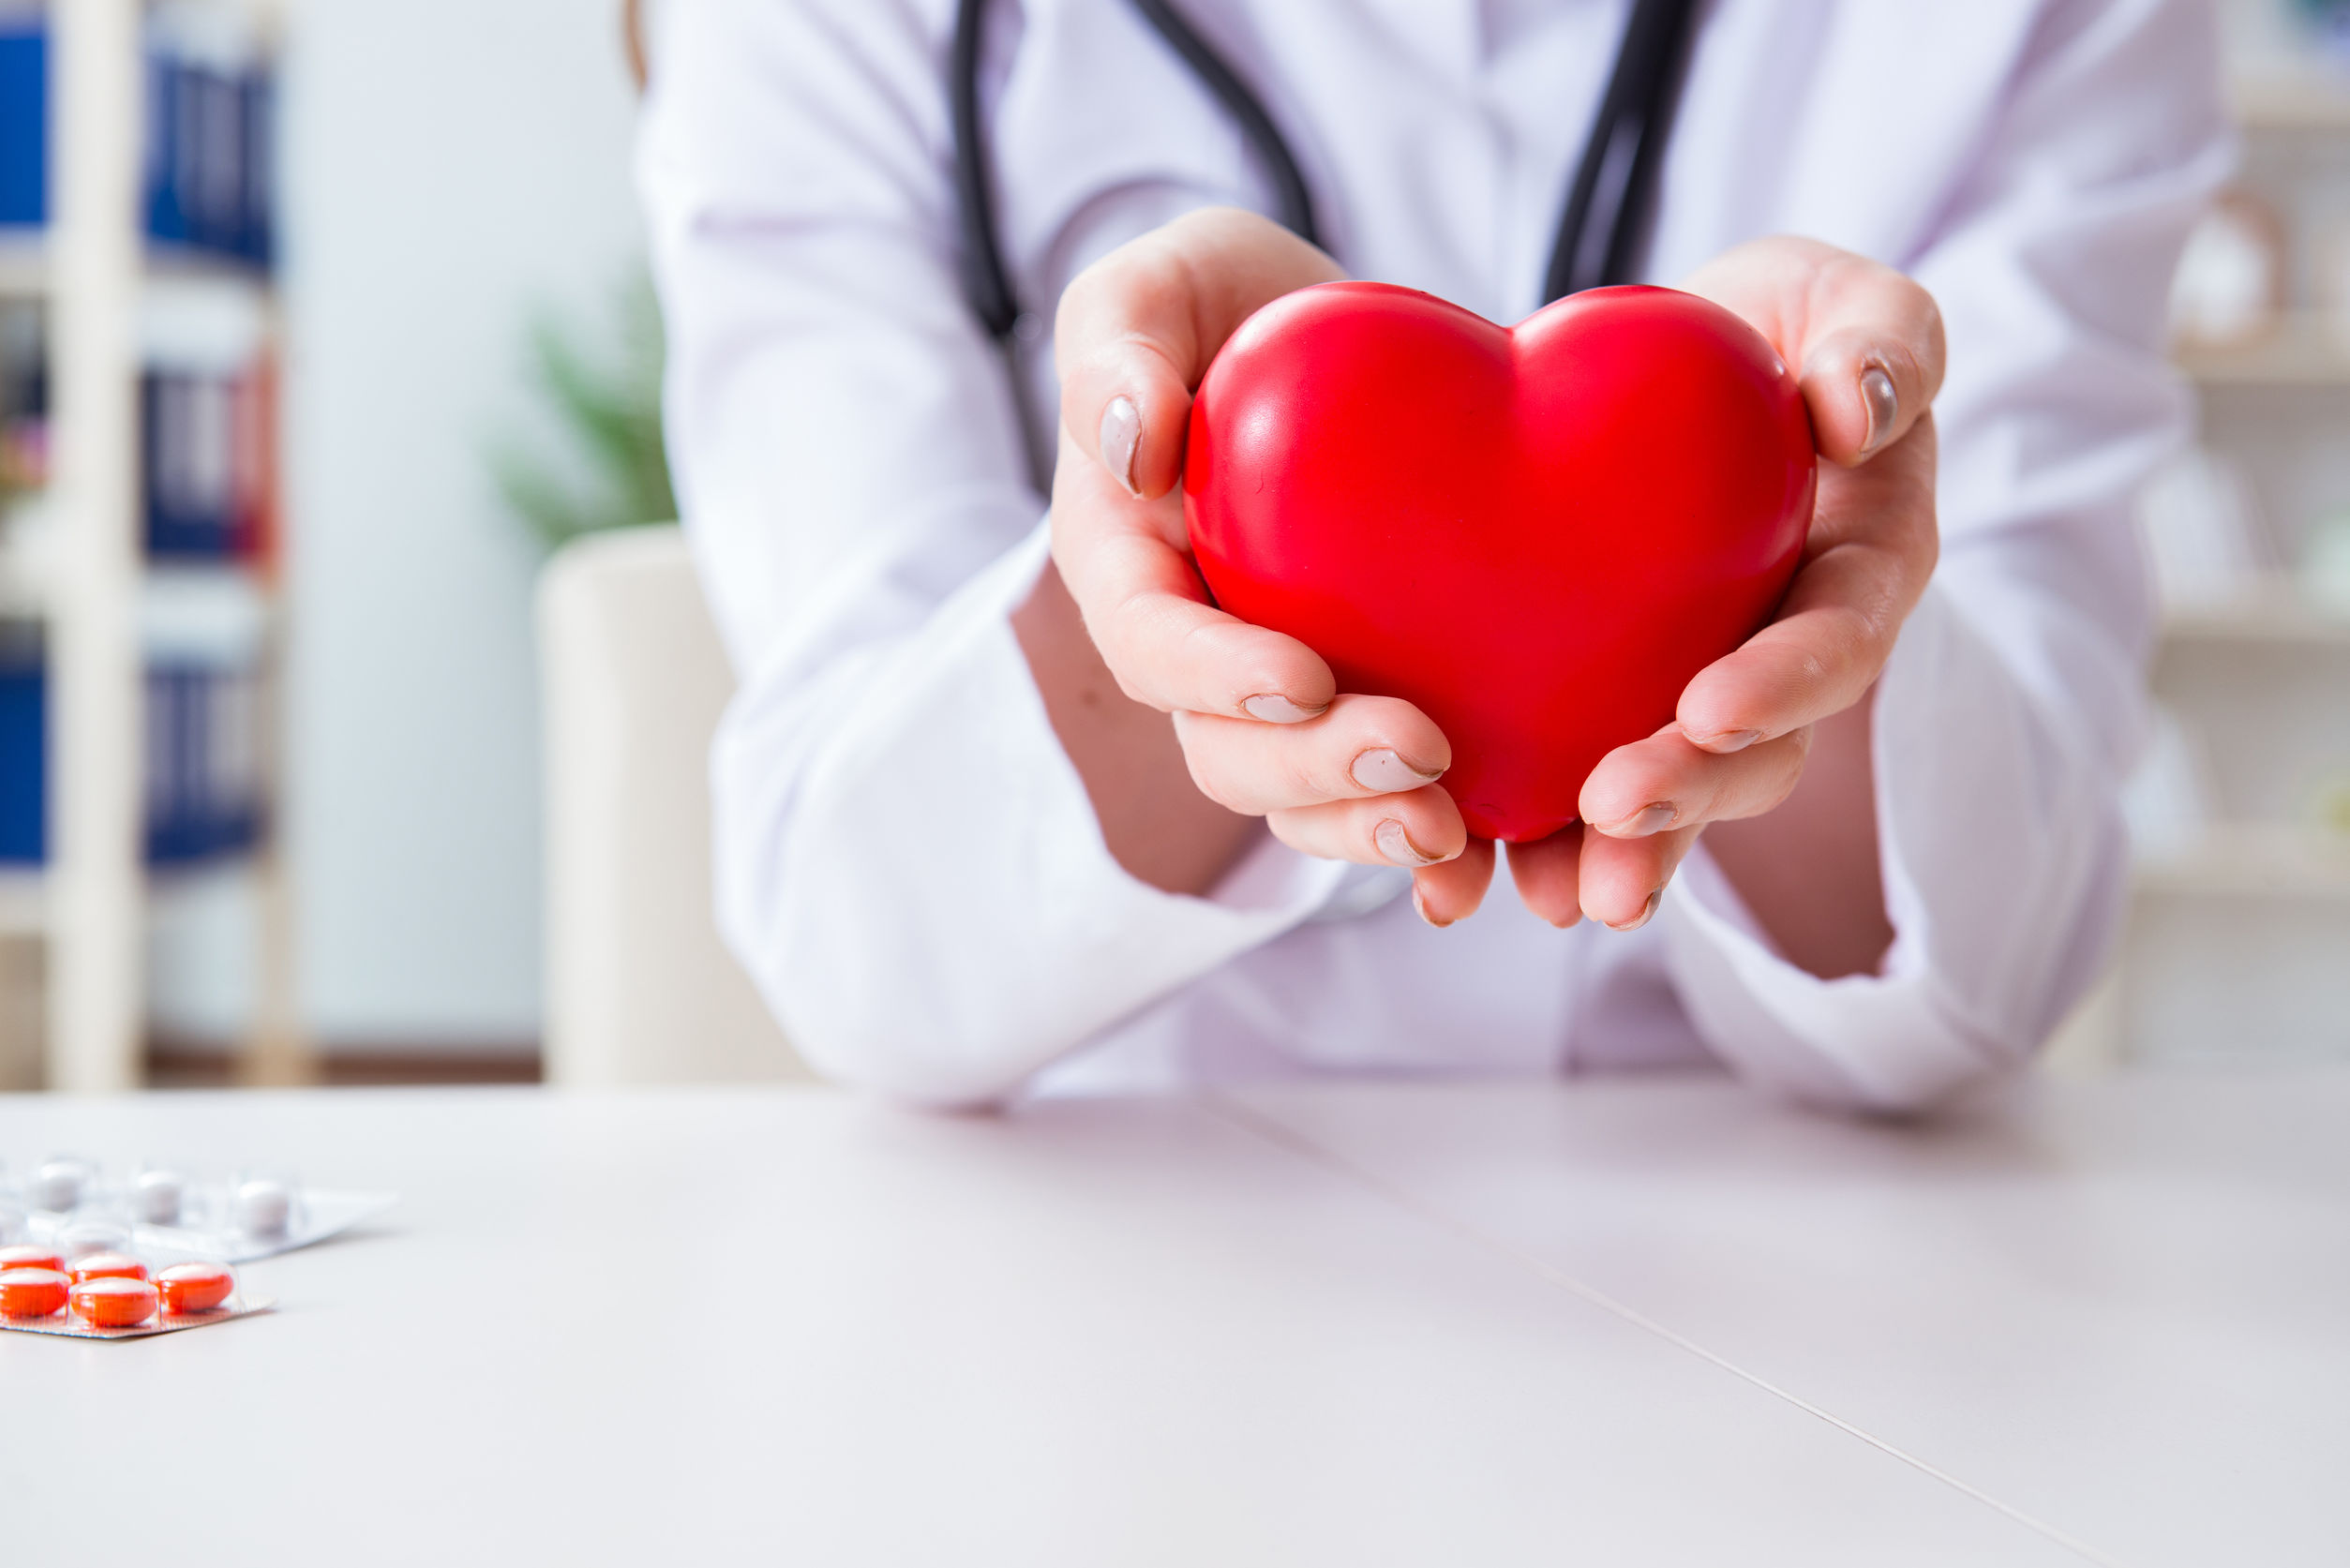 Self-care for patients with heart failure